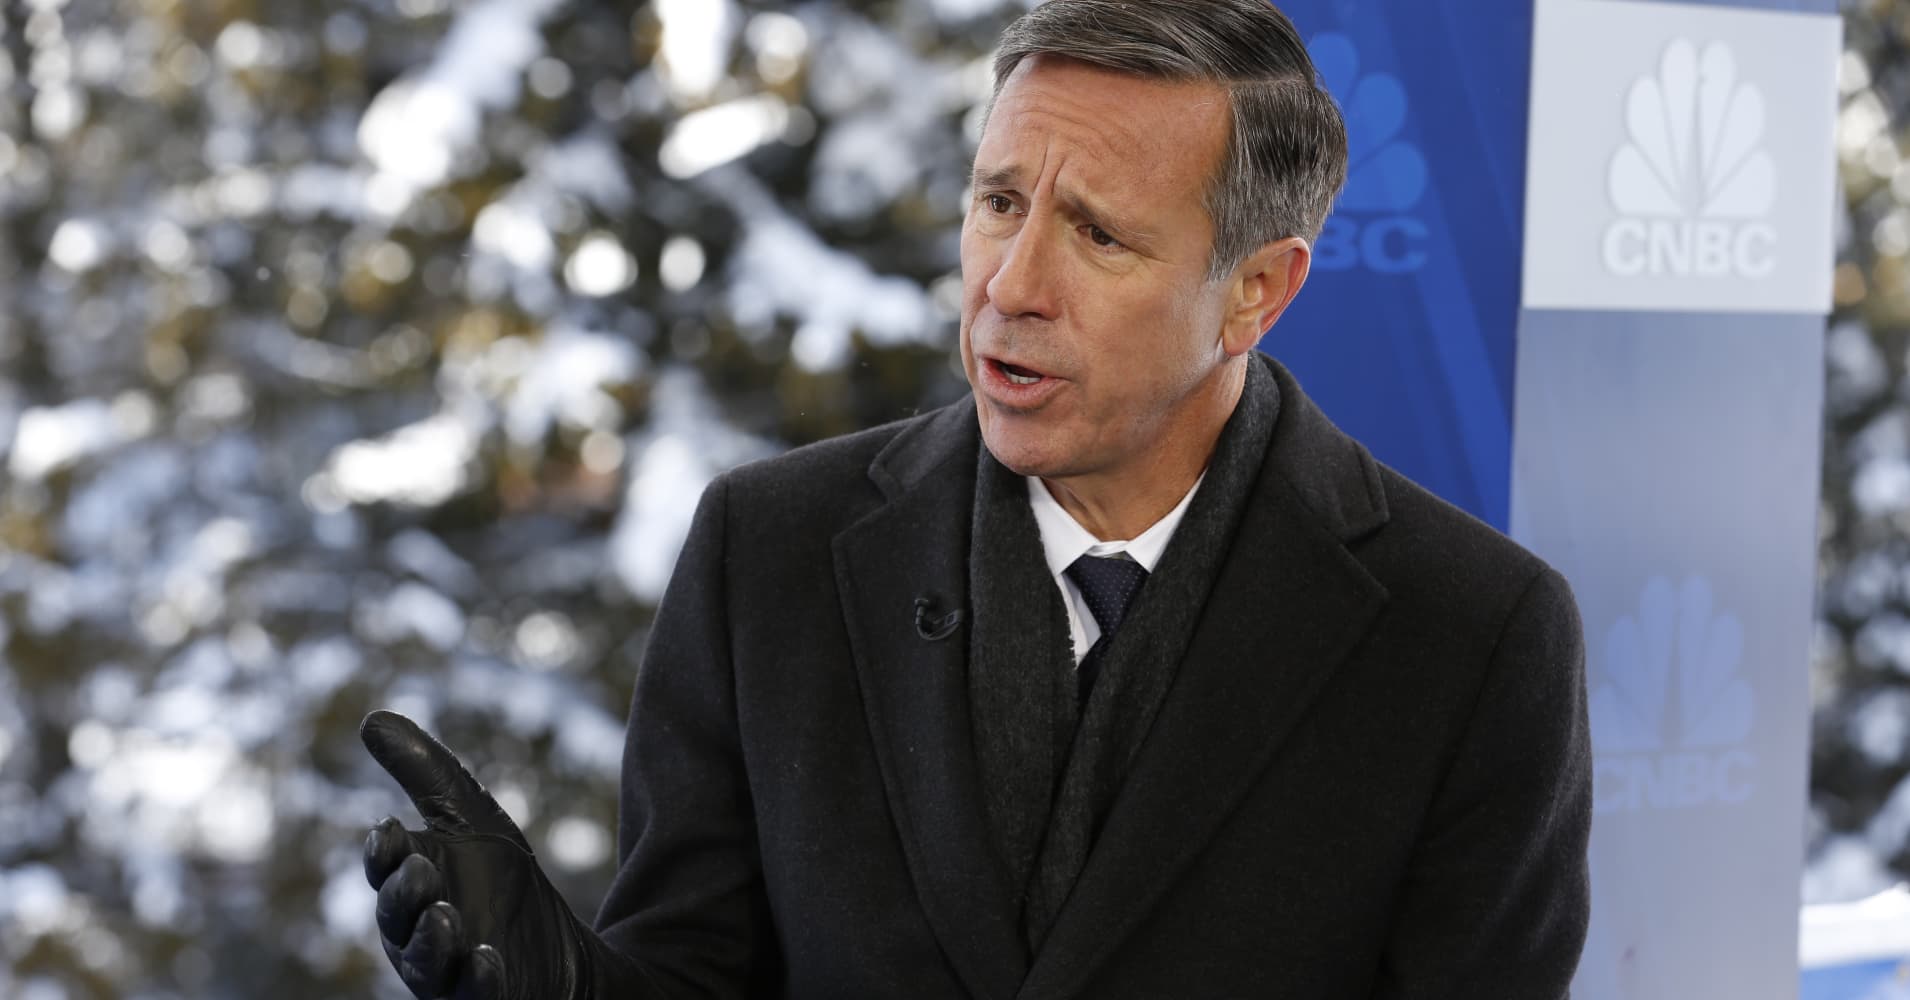 Marriott CEO: 'Anything can happen' for global business in trade war